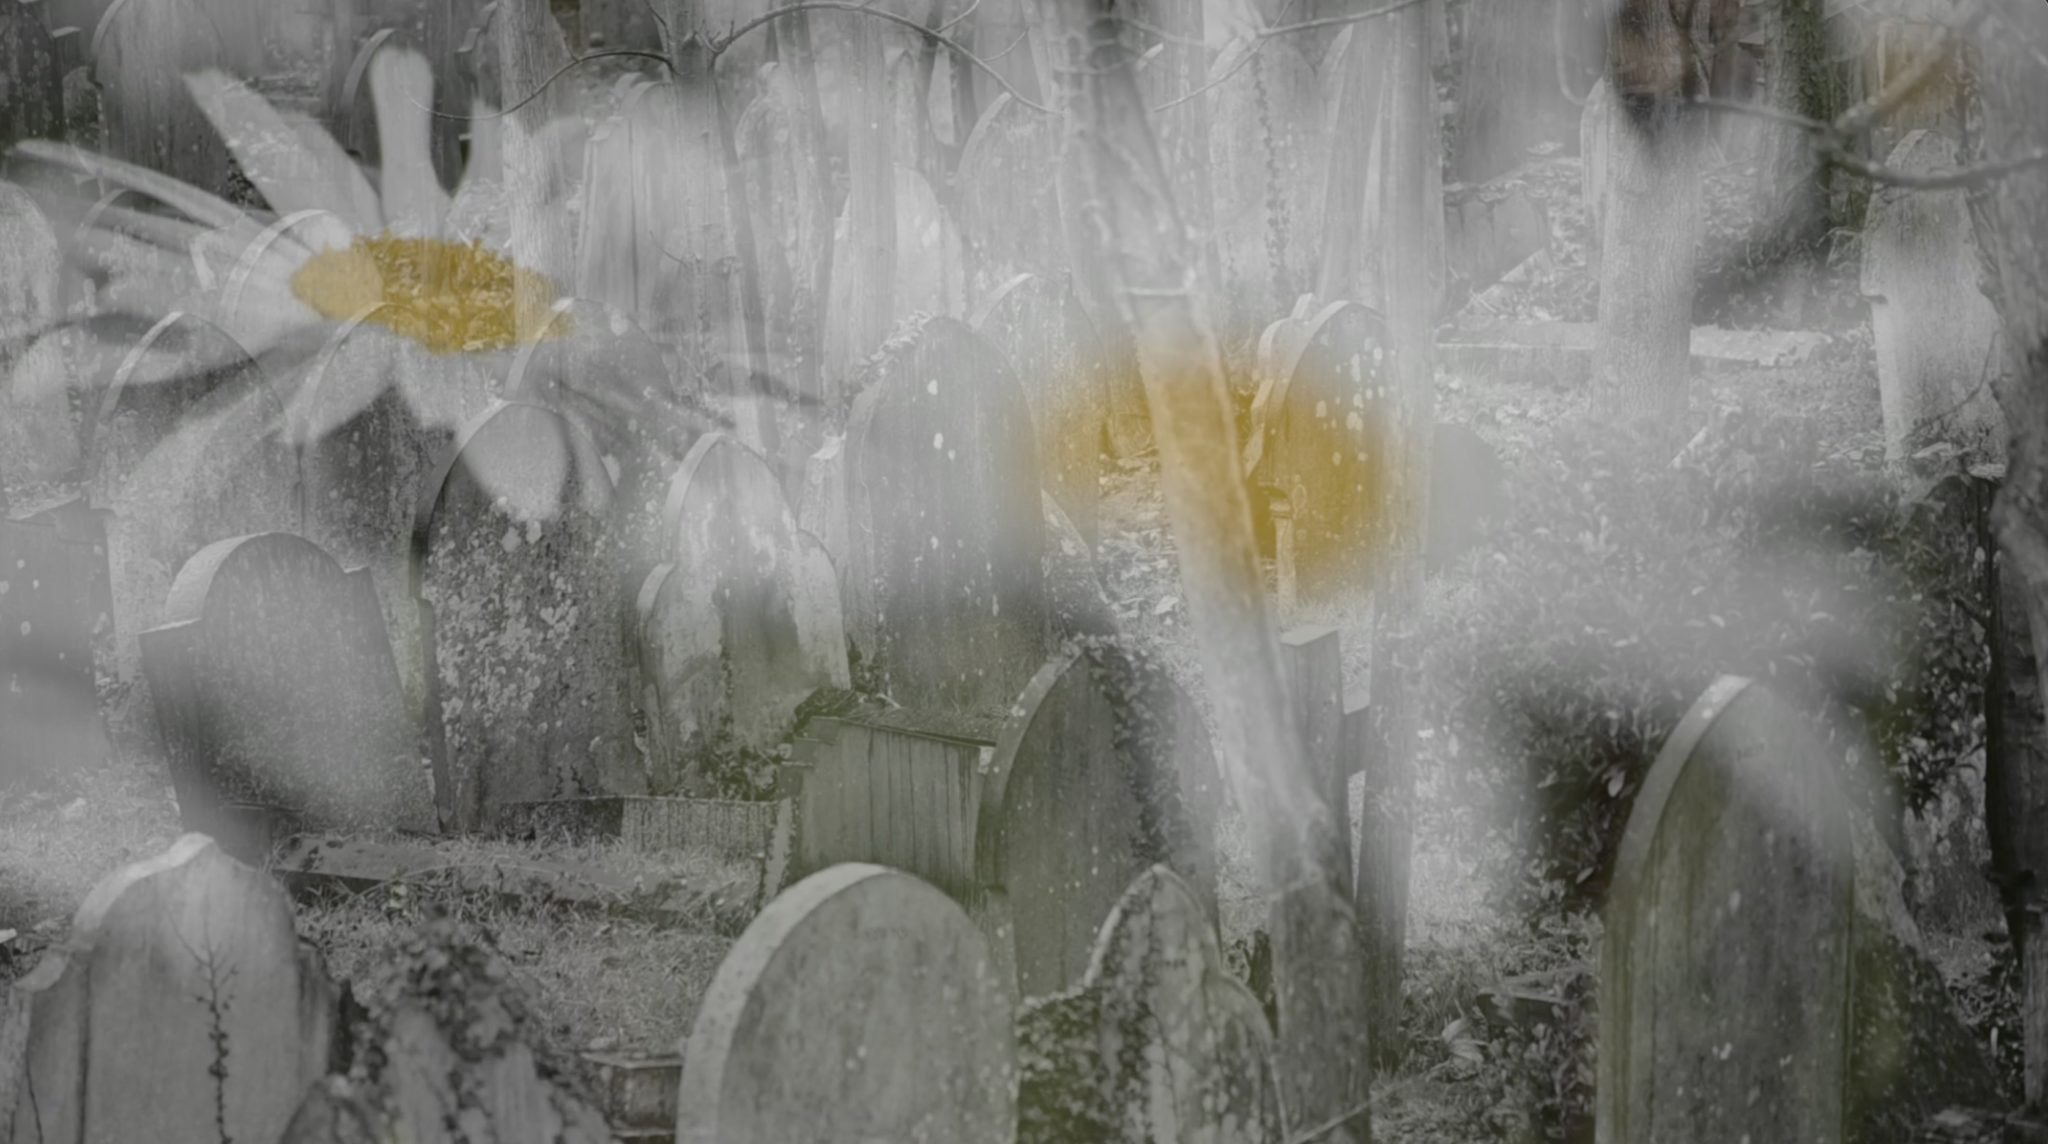 An image from The Conversation Continues: We Are Still Listening by Trevor Mathison, close up blurred images of daisies are superimposed over an image of gravestones